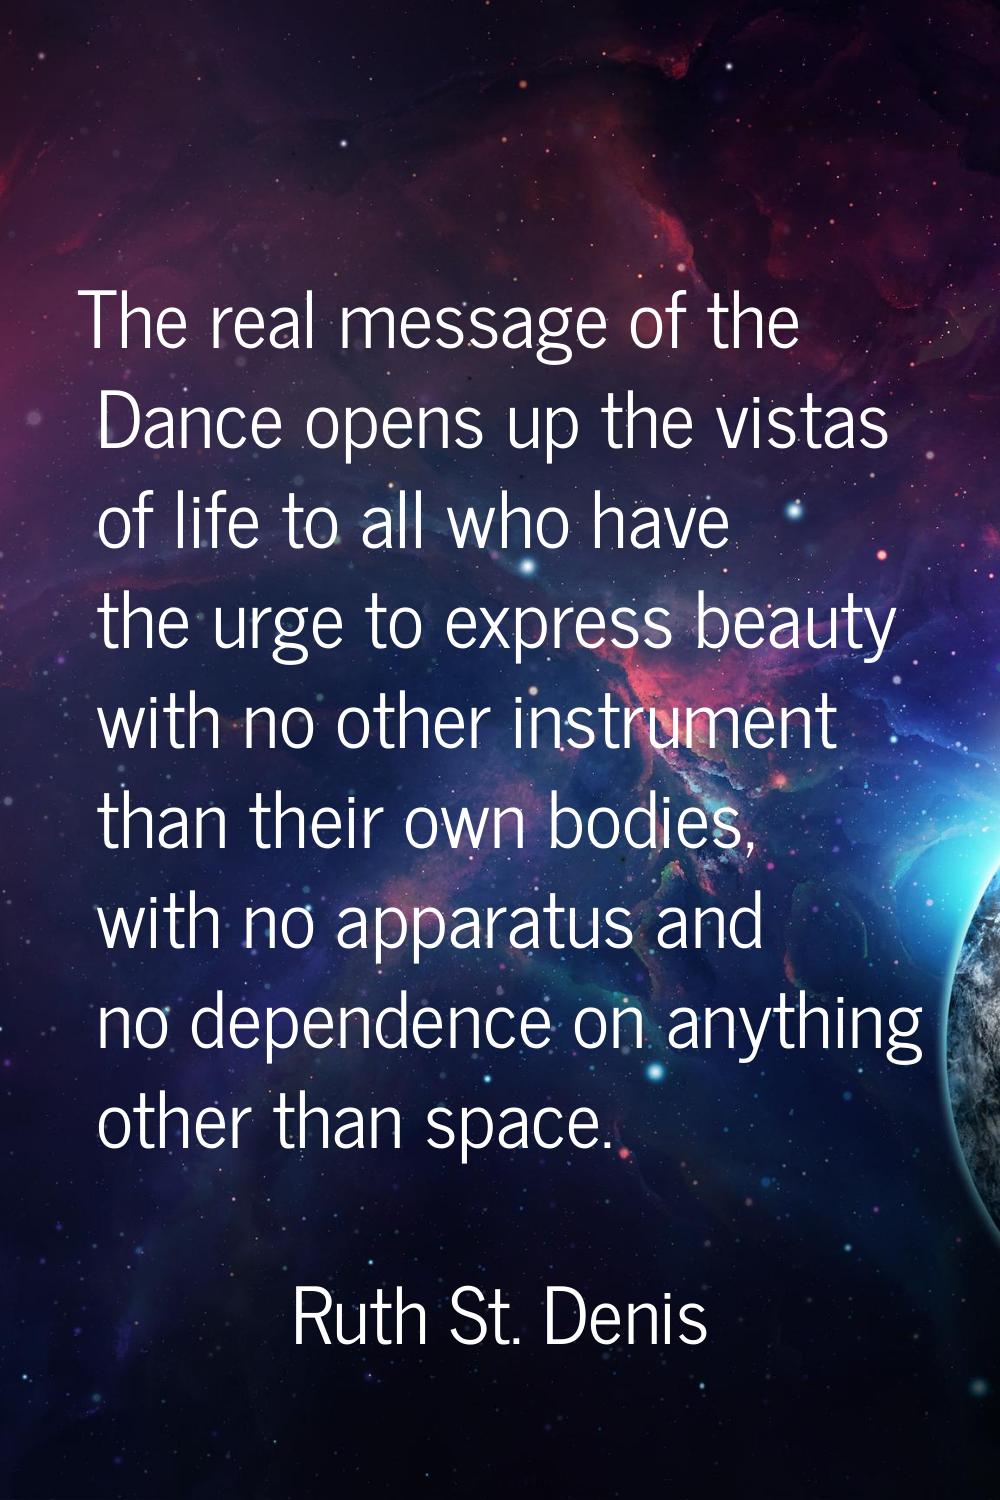 The real message of the Dance opens up the vistas of life to all who have the urge to express beaut